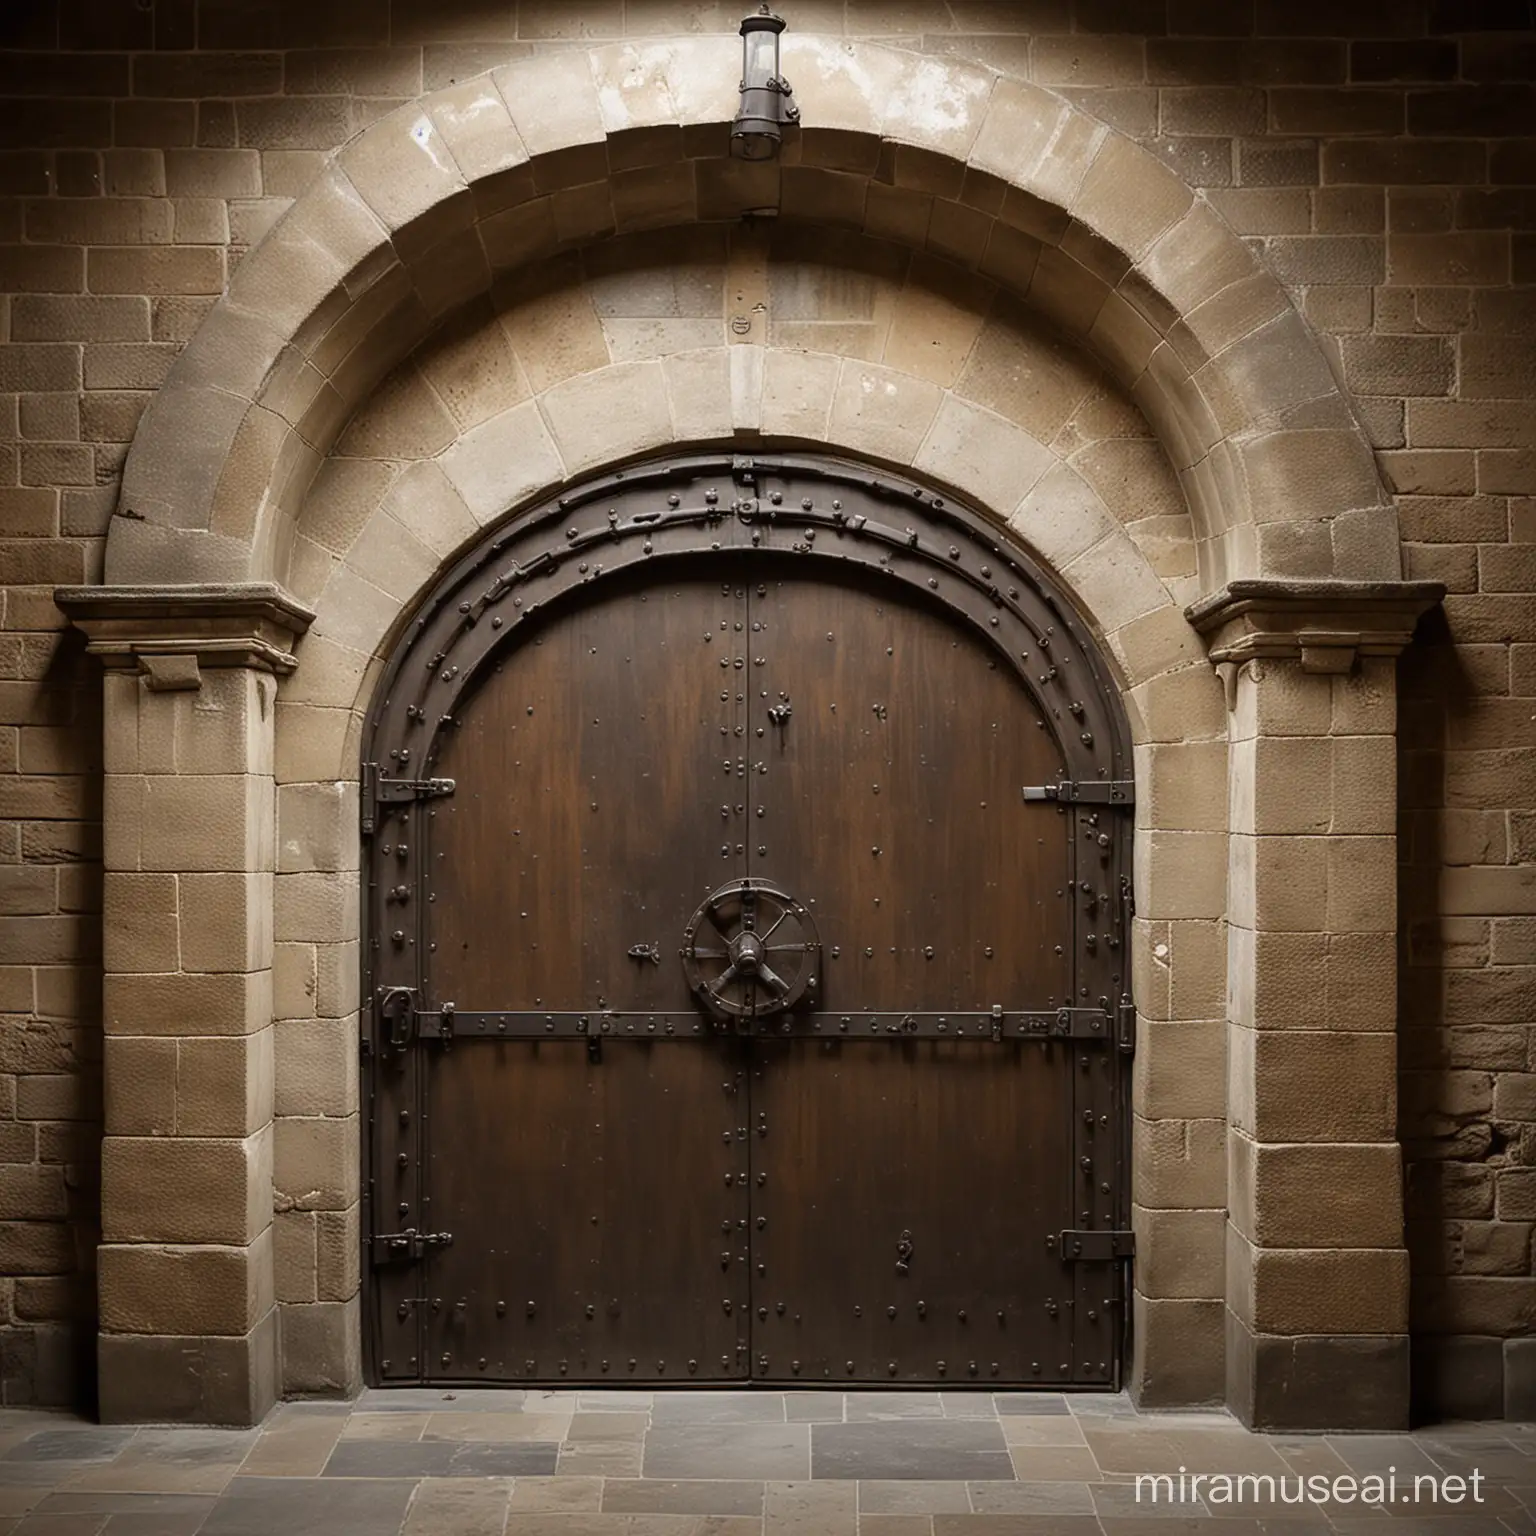 An unadorned medieval style vault in the basement of a medieval bank building. The massive, steel, medieval vault door is half open; In the strong room, medieval lockers can be seen on the wall. Sigma 85mm F/1.4